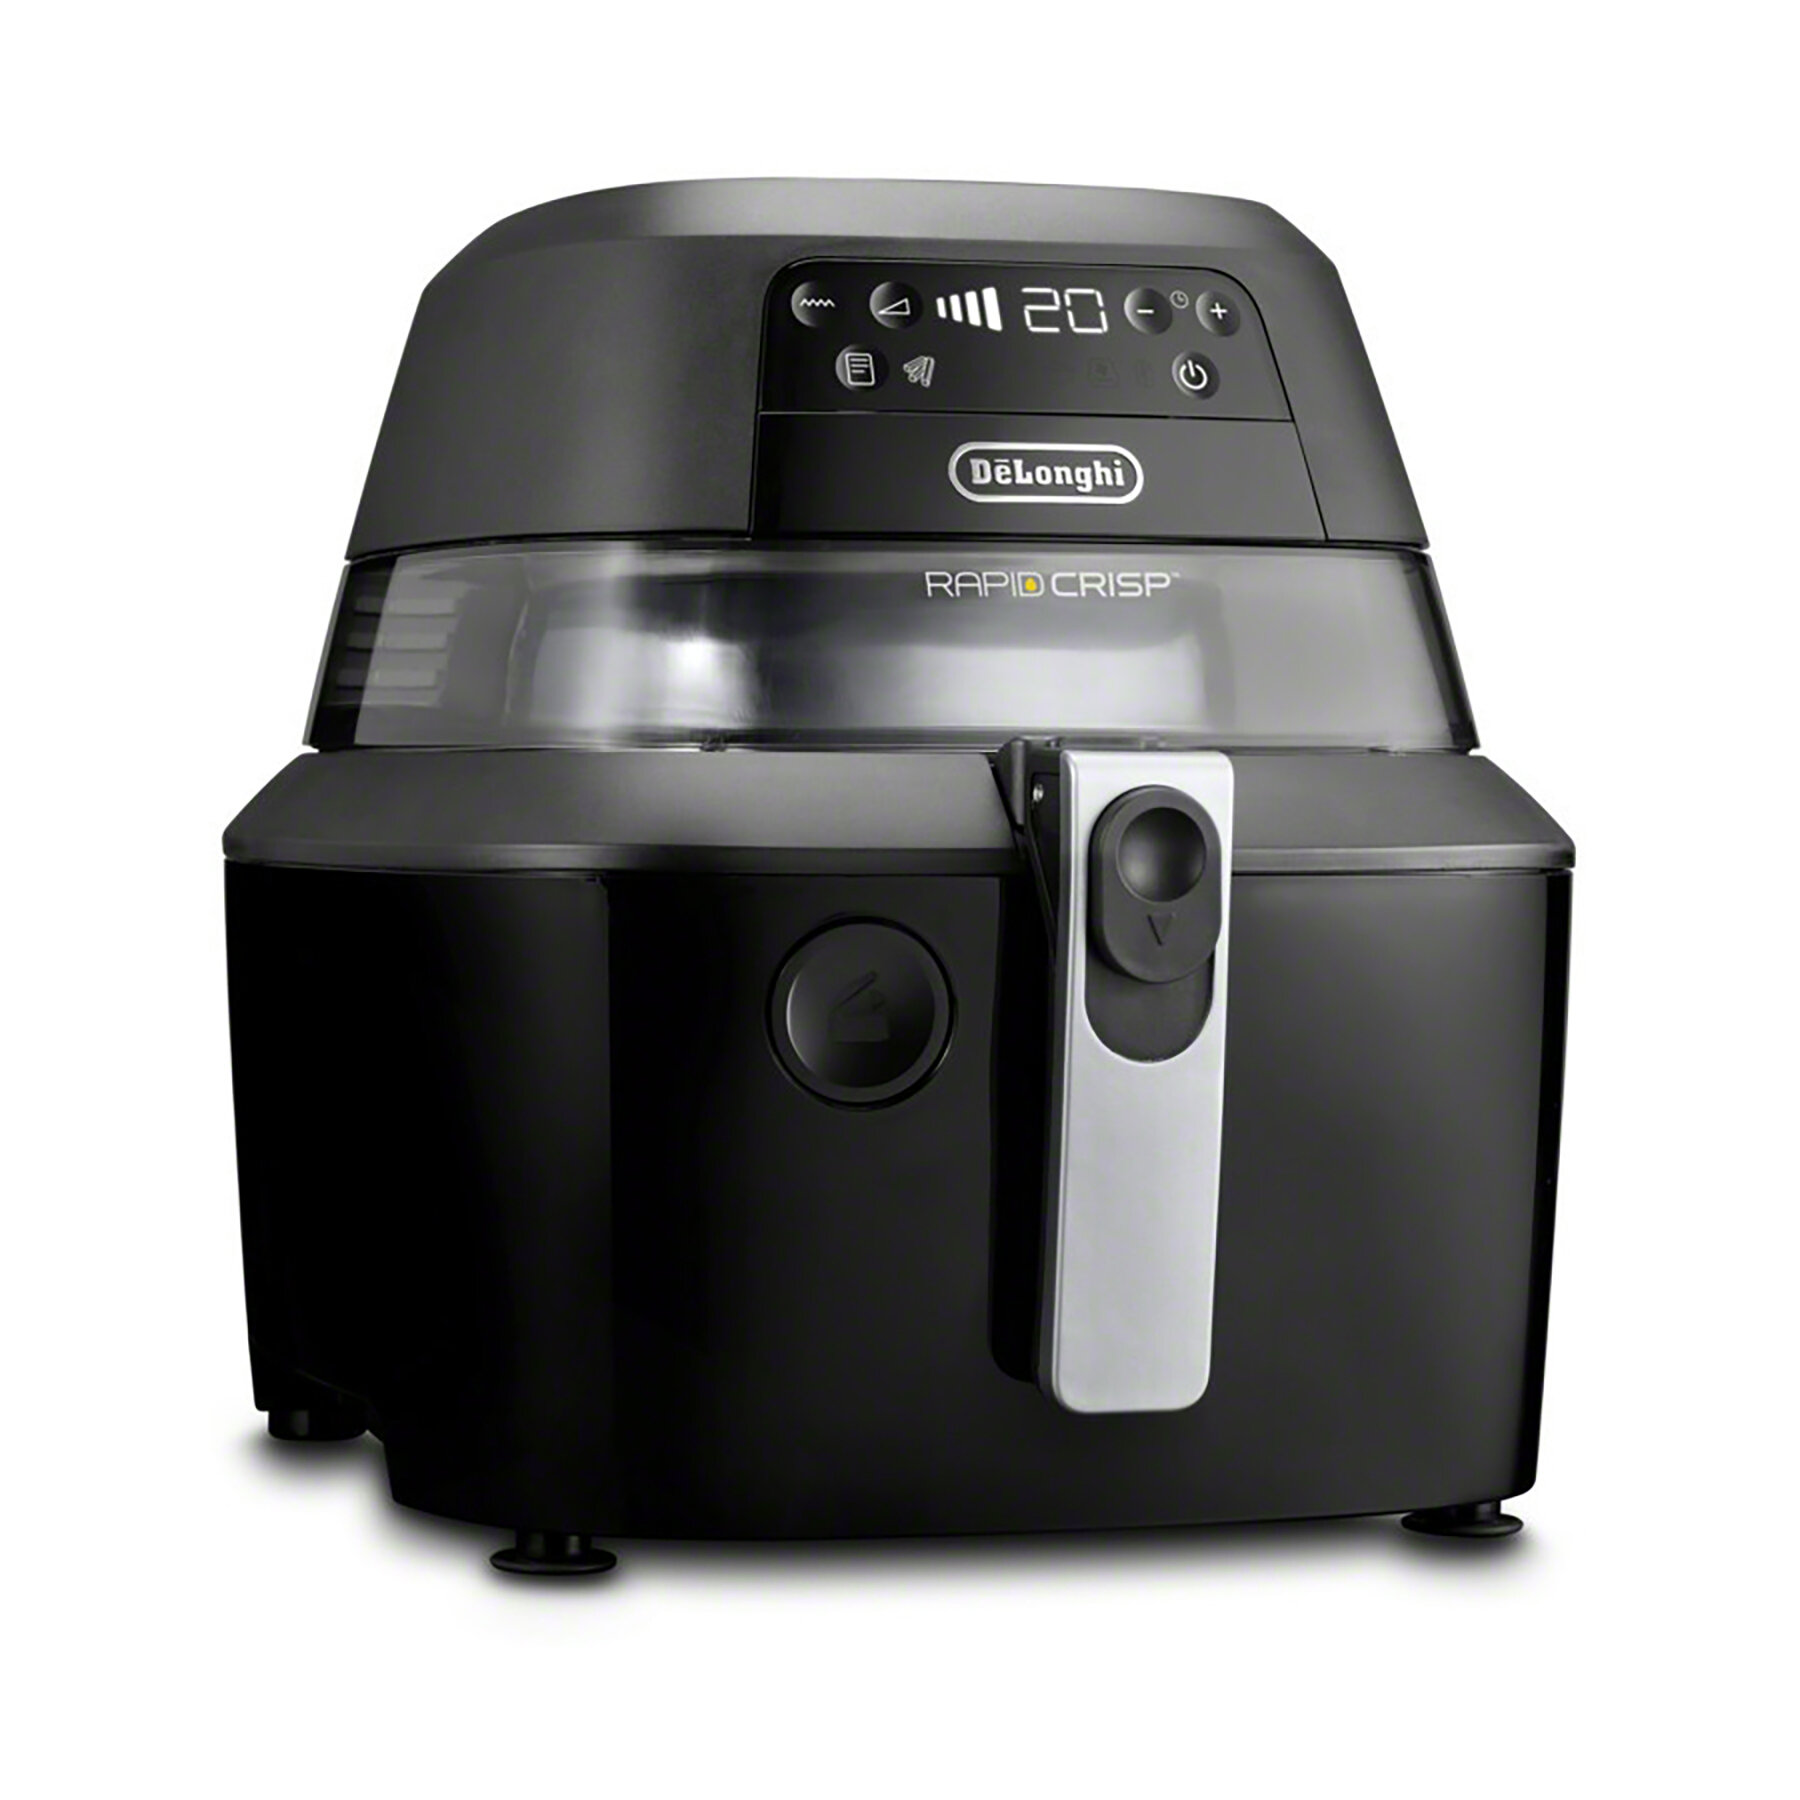 T-fal Easy Fry & Grill Xl 2-in-1 Air Fryer Combo, 4.4 Quart